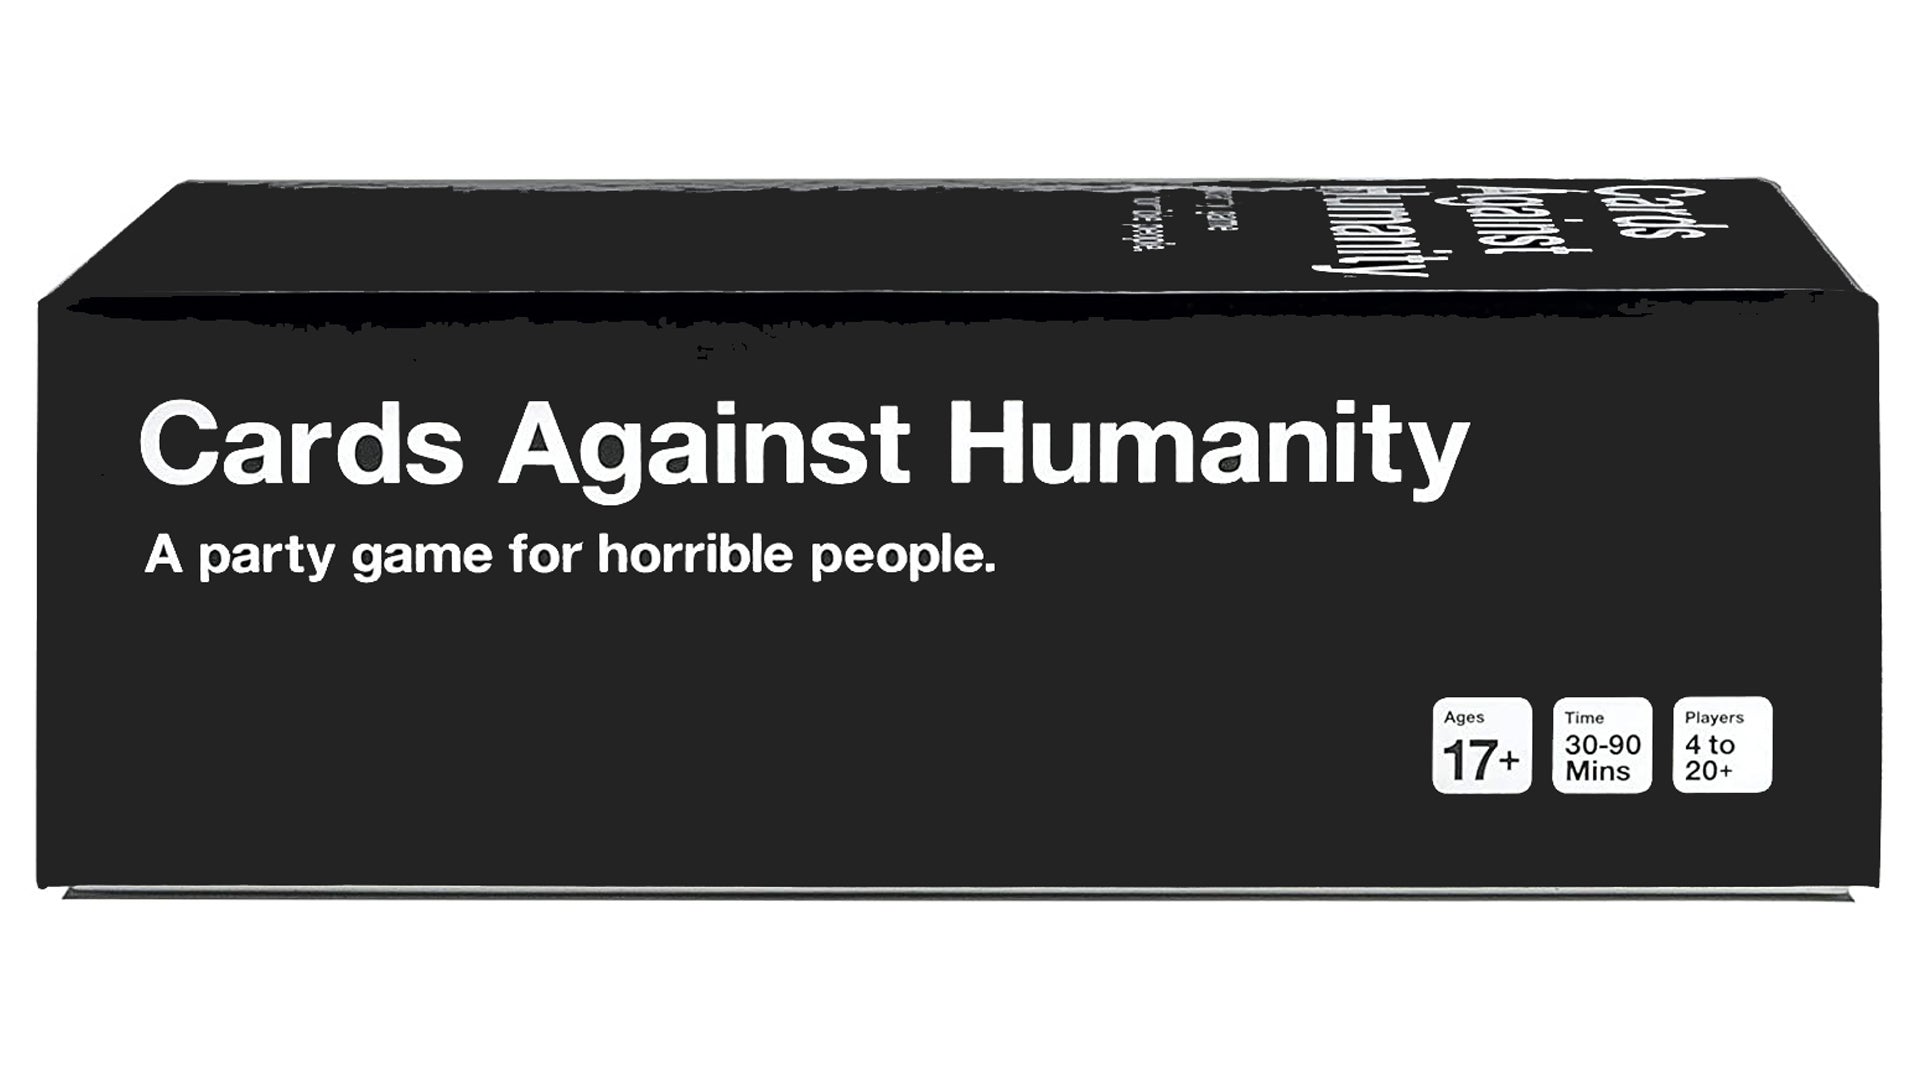 Image for Cards Against Humanity responds to allegations of “toxic work environment”